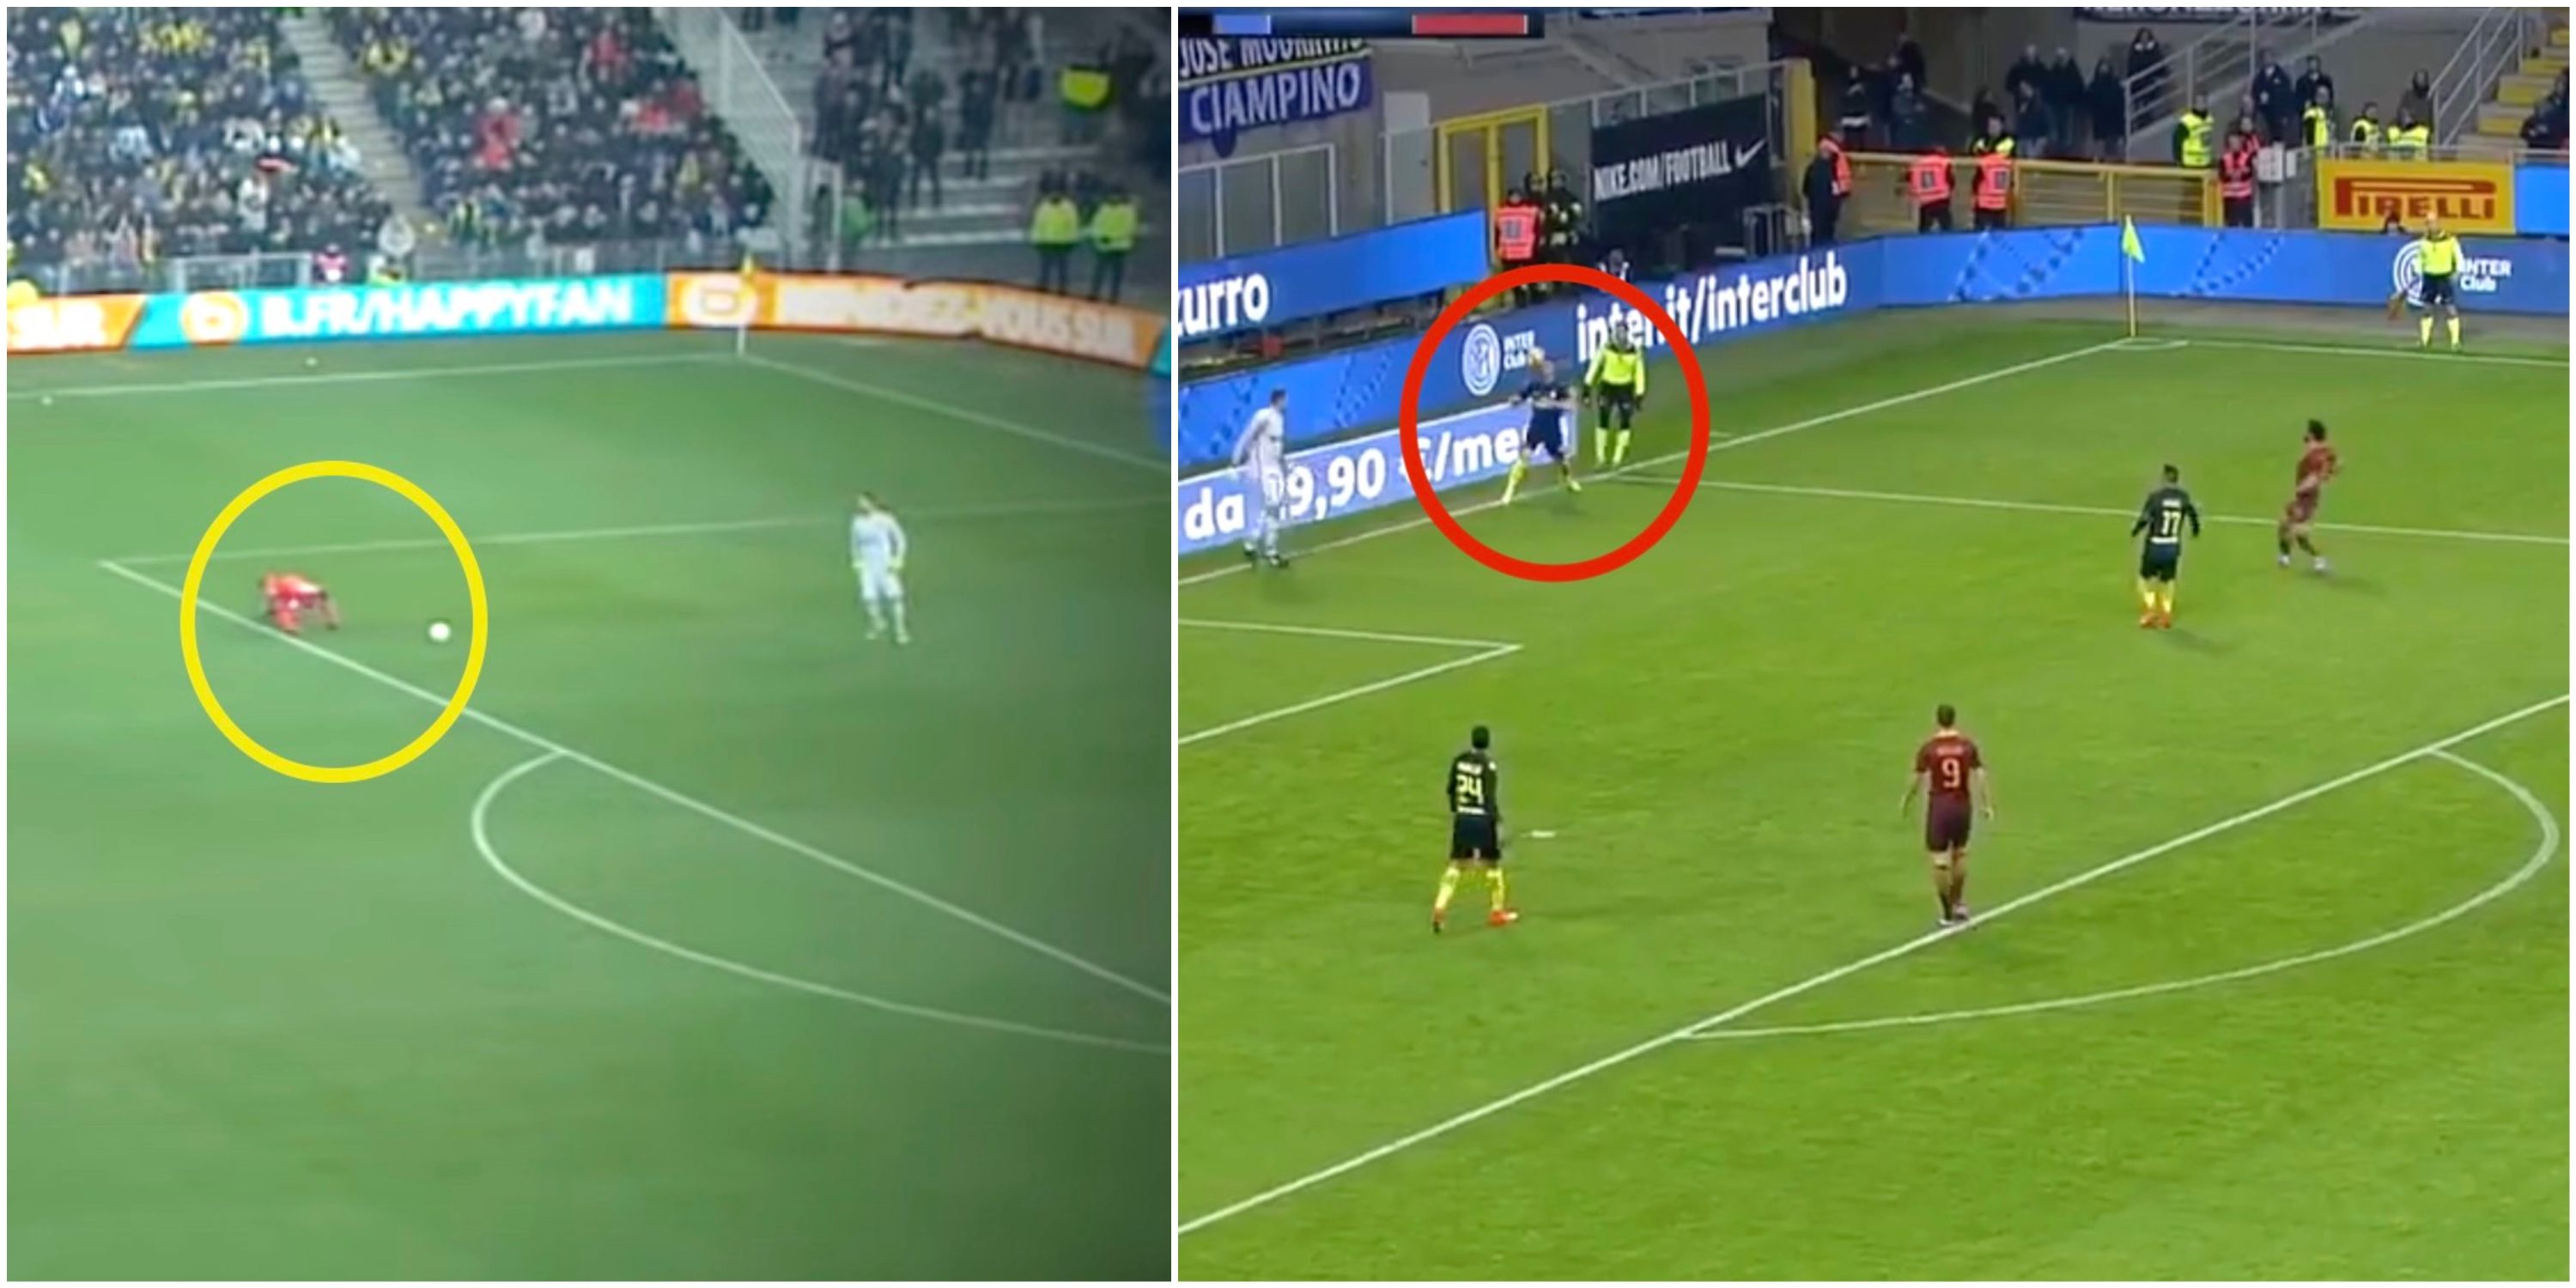 Marco Verratti and Ivan Perisic were once booked after heading ball back to their goalkeepers